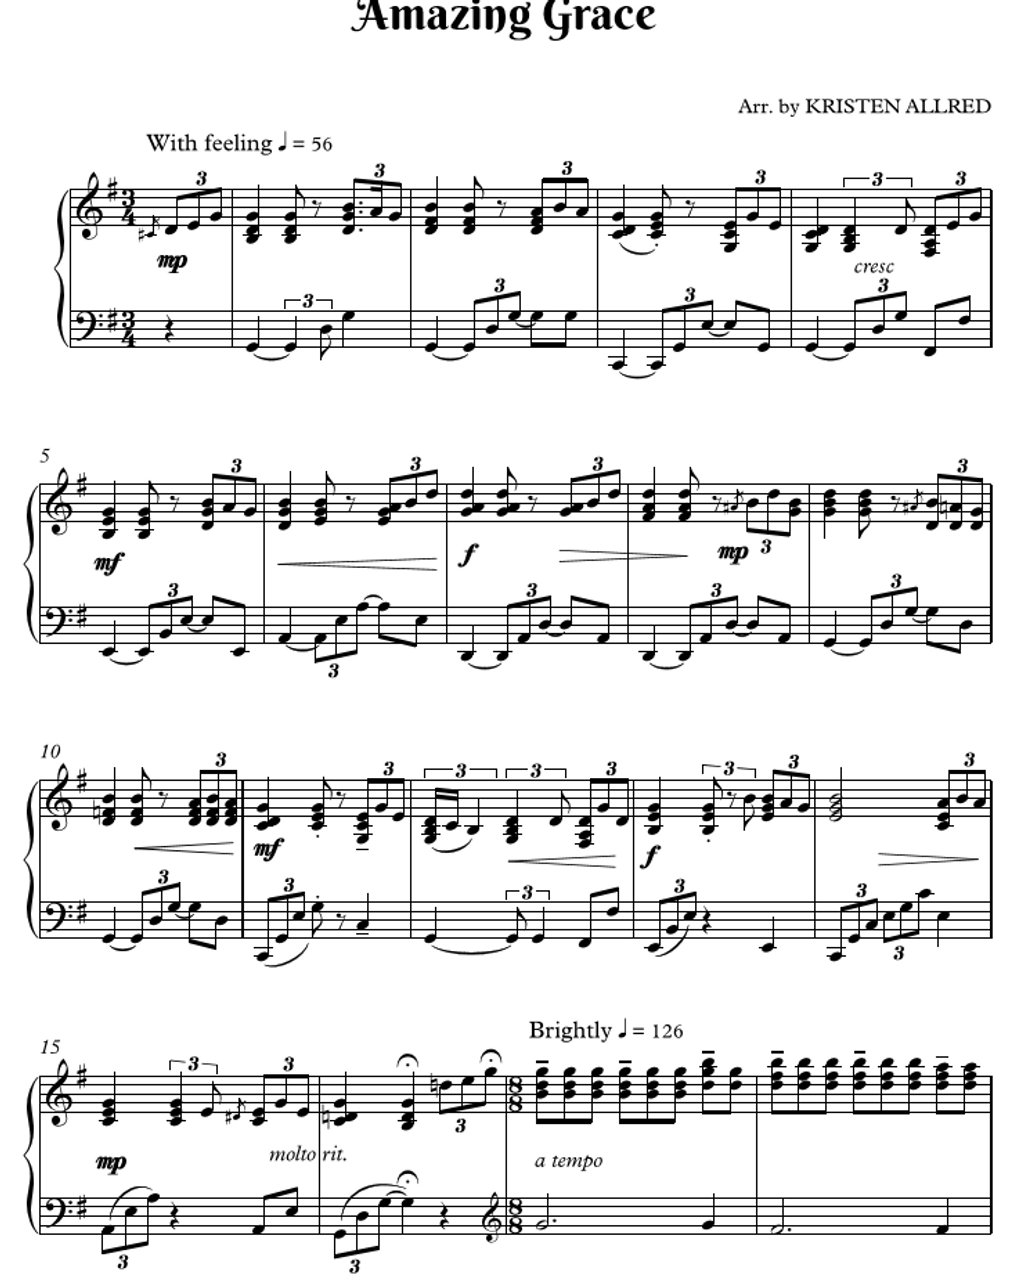 Piano Notes For Amazing Grace - www.inf-inet.com